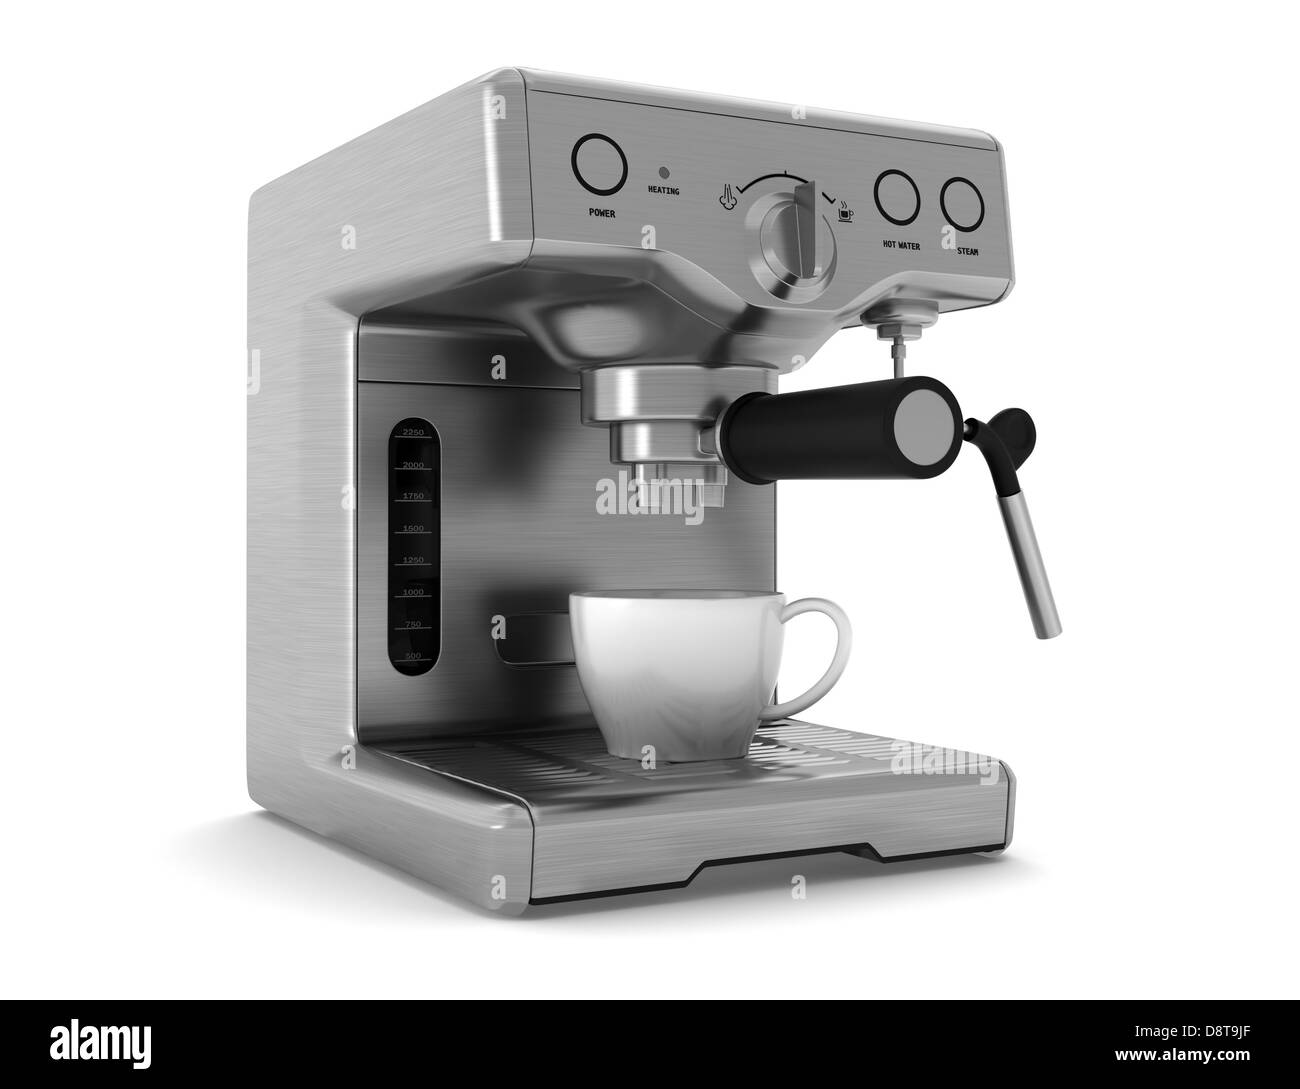 https://c8.alamy.com/comp/D8T9JF/coffee-machine-isolated-on-white-background-D8T9JF.jpg